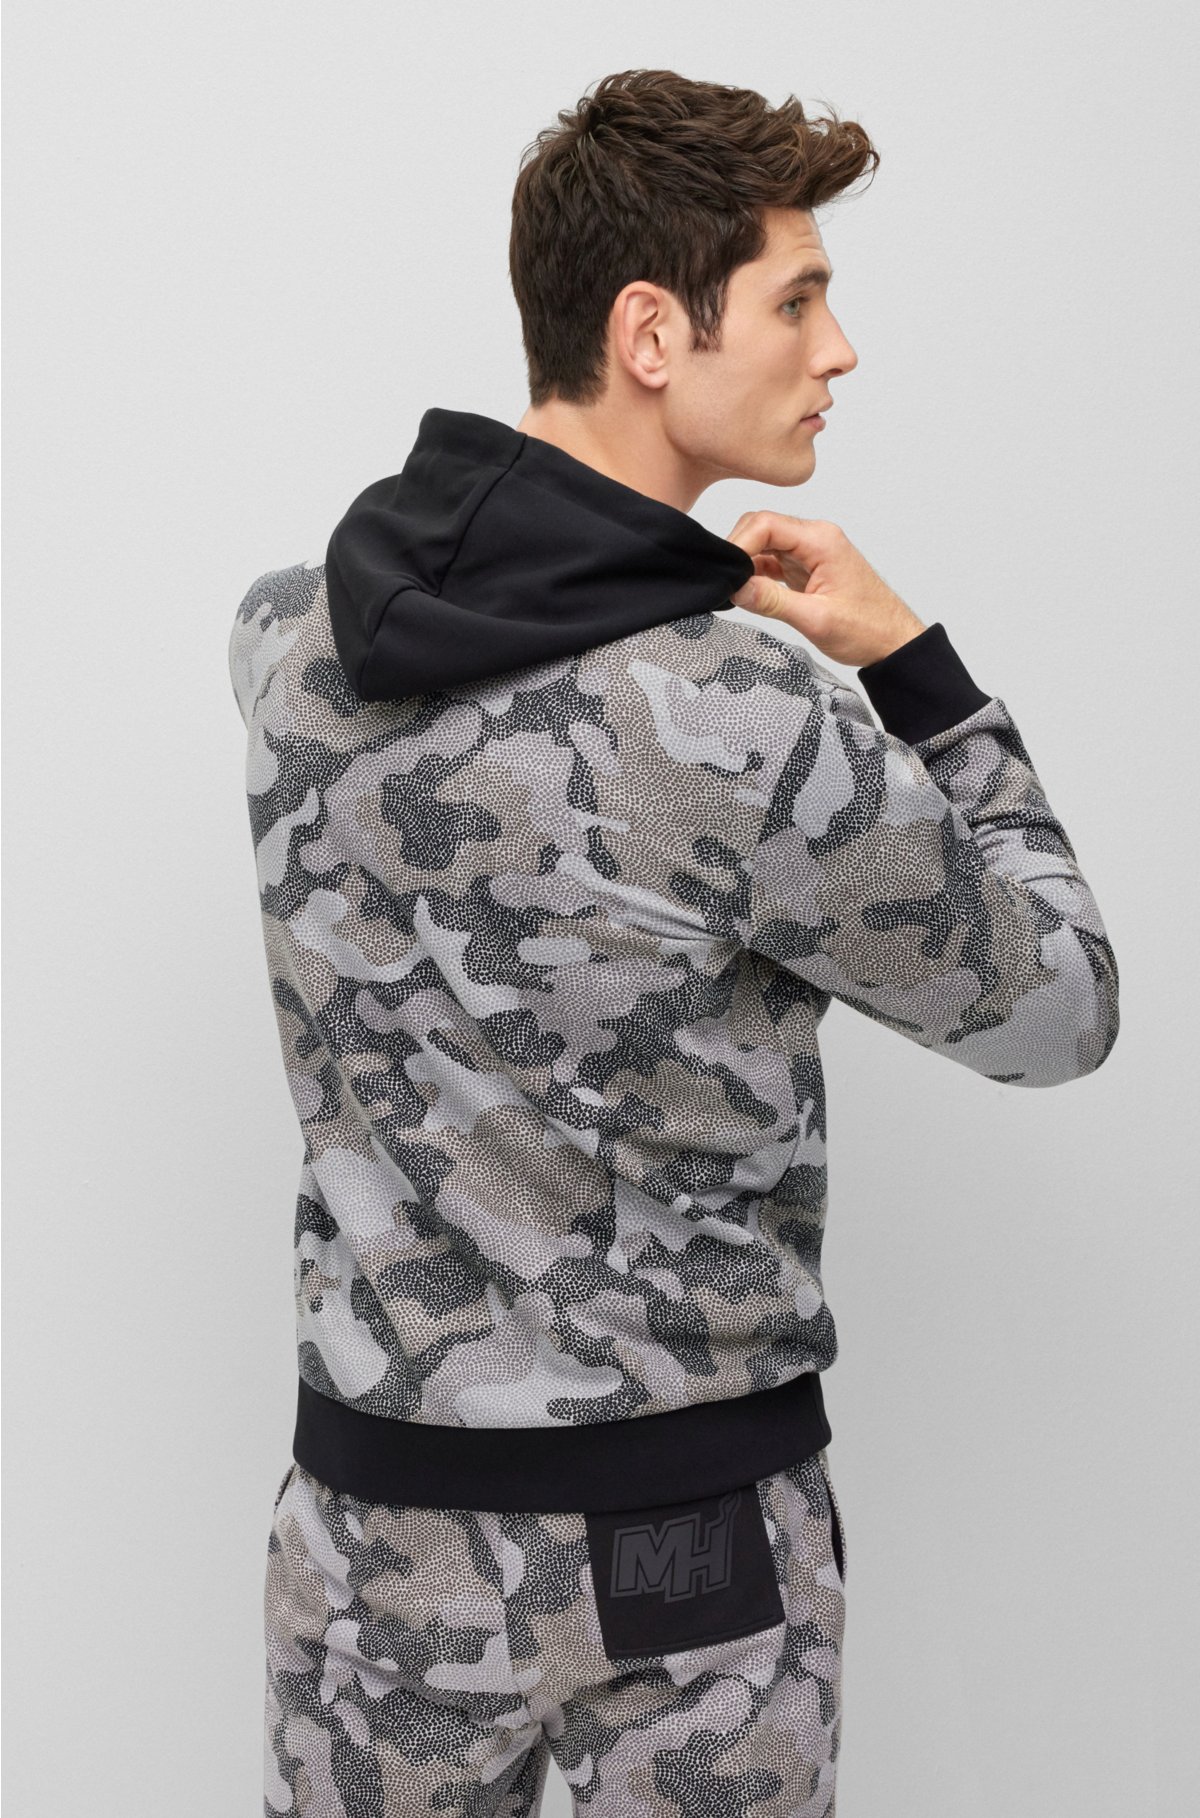 BOSS - BOSS & NBA cotton-terry hoodie with camouflage pattern